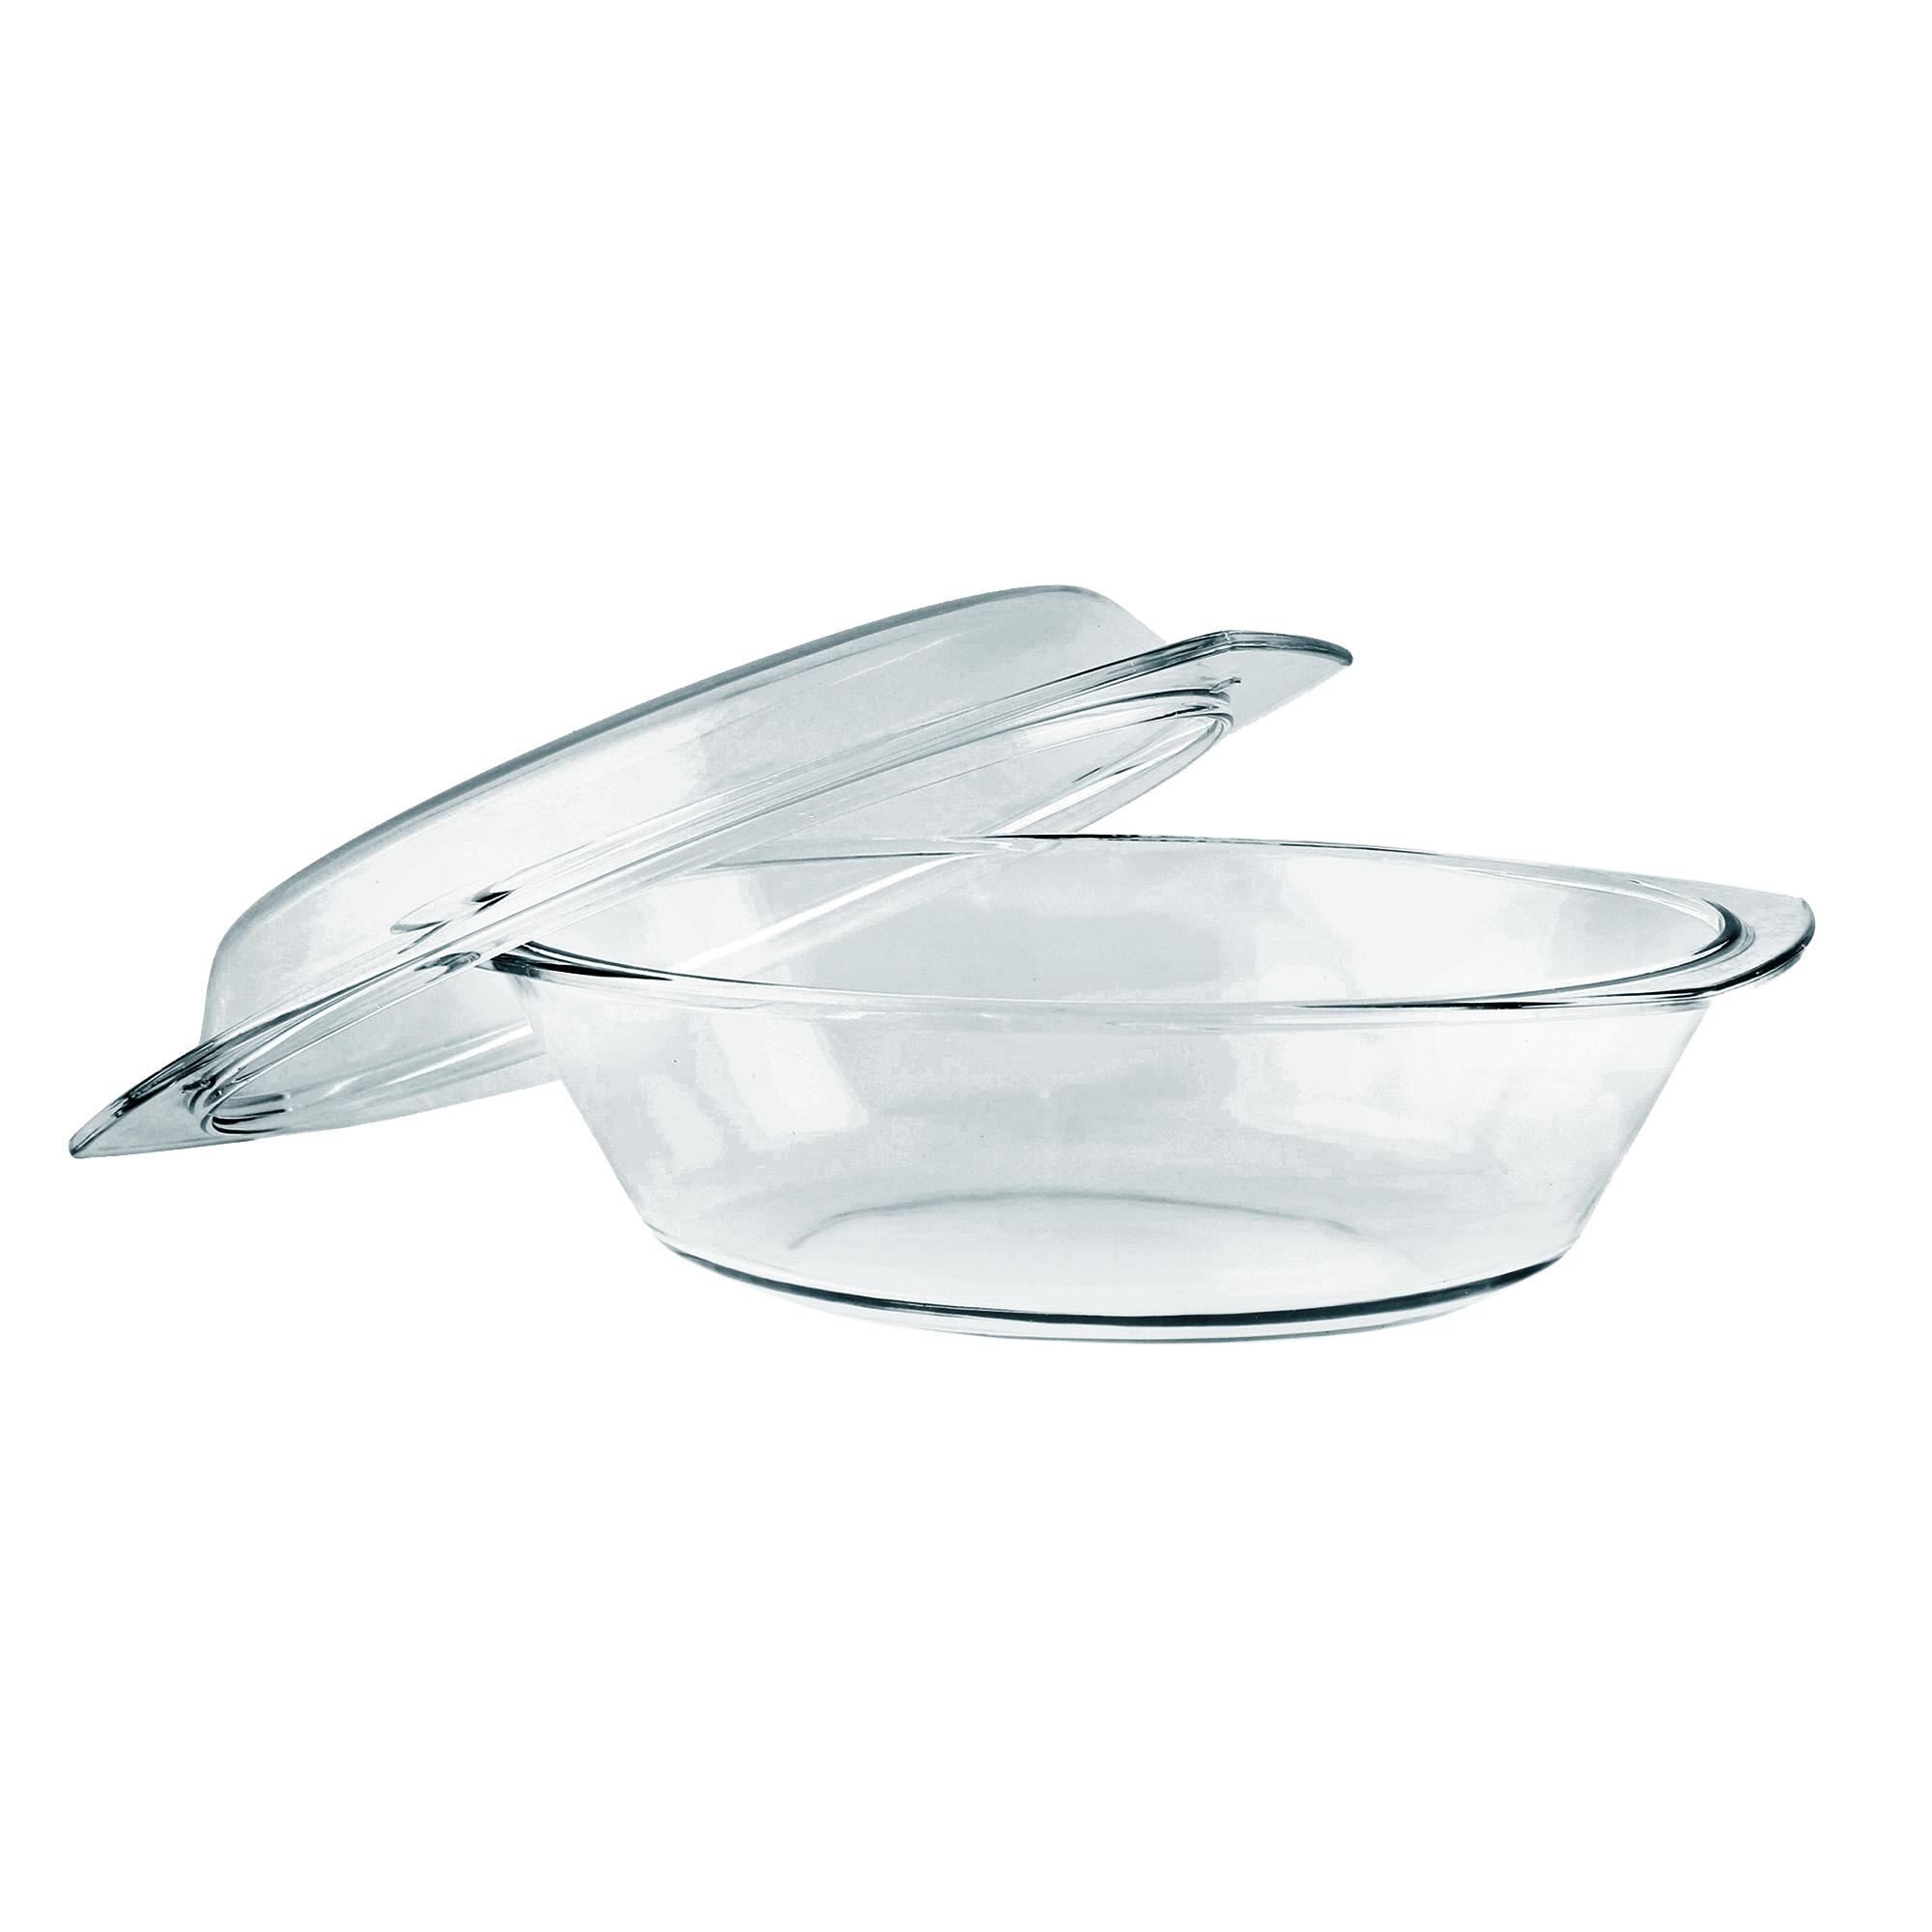 Home Discovery Heat Resistant Oval Glass Casserole with Cover 2.5 Liters (1 pc)